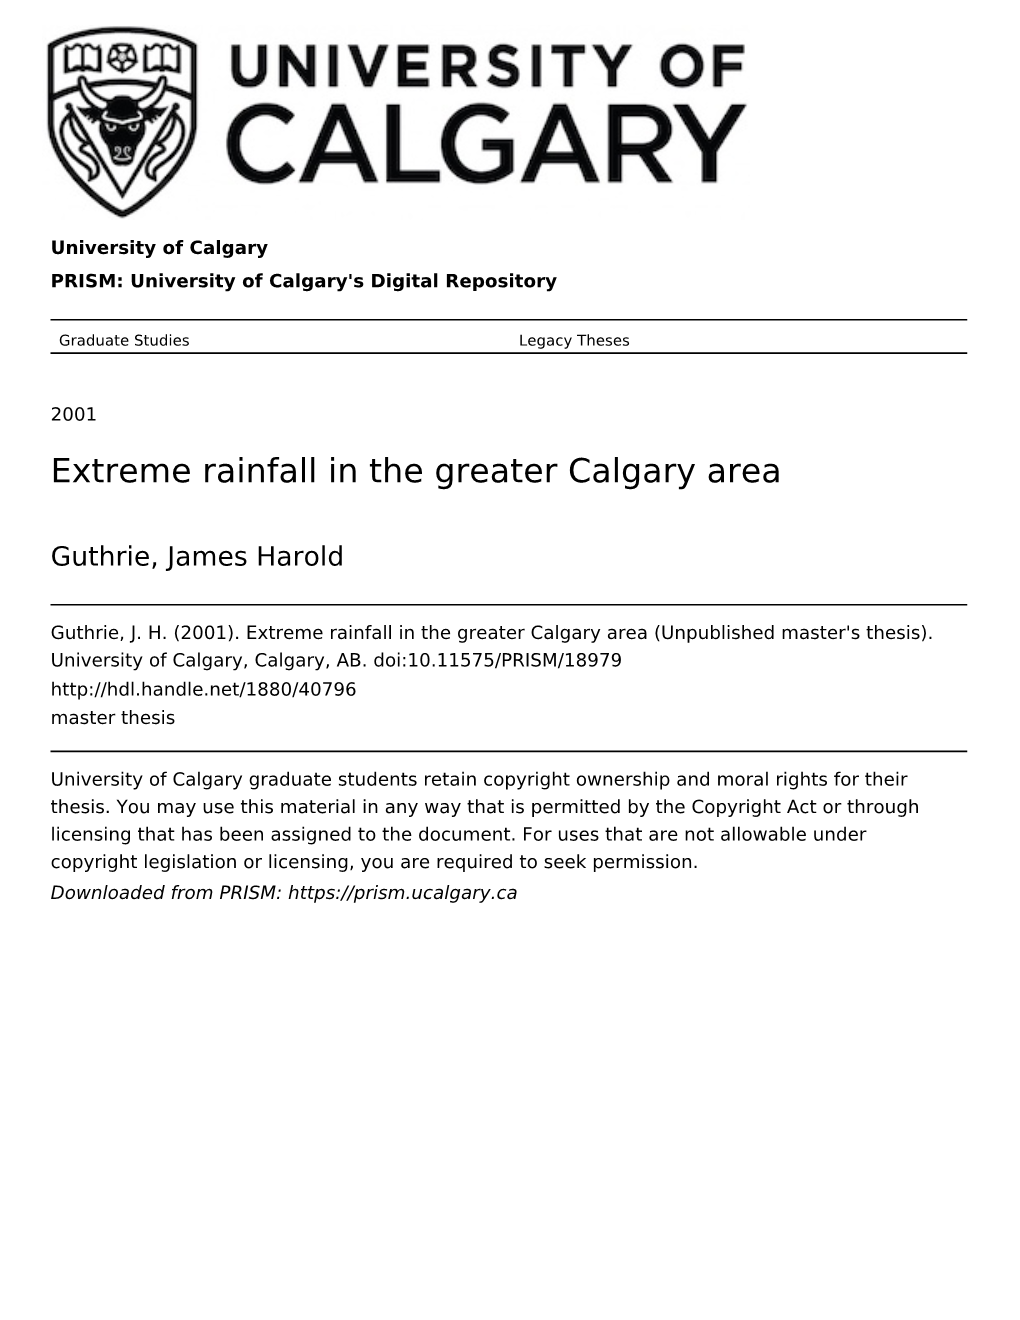 Extreme Rainfall in the Greater Calgary Area